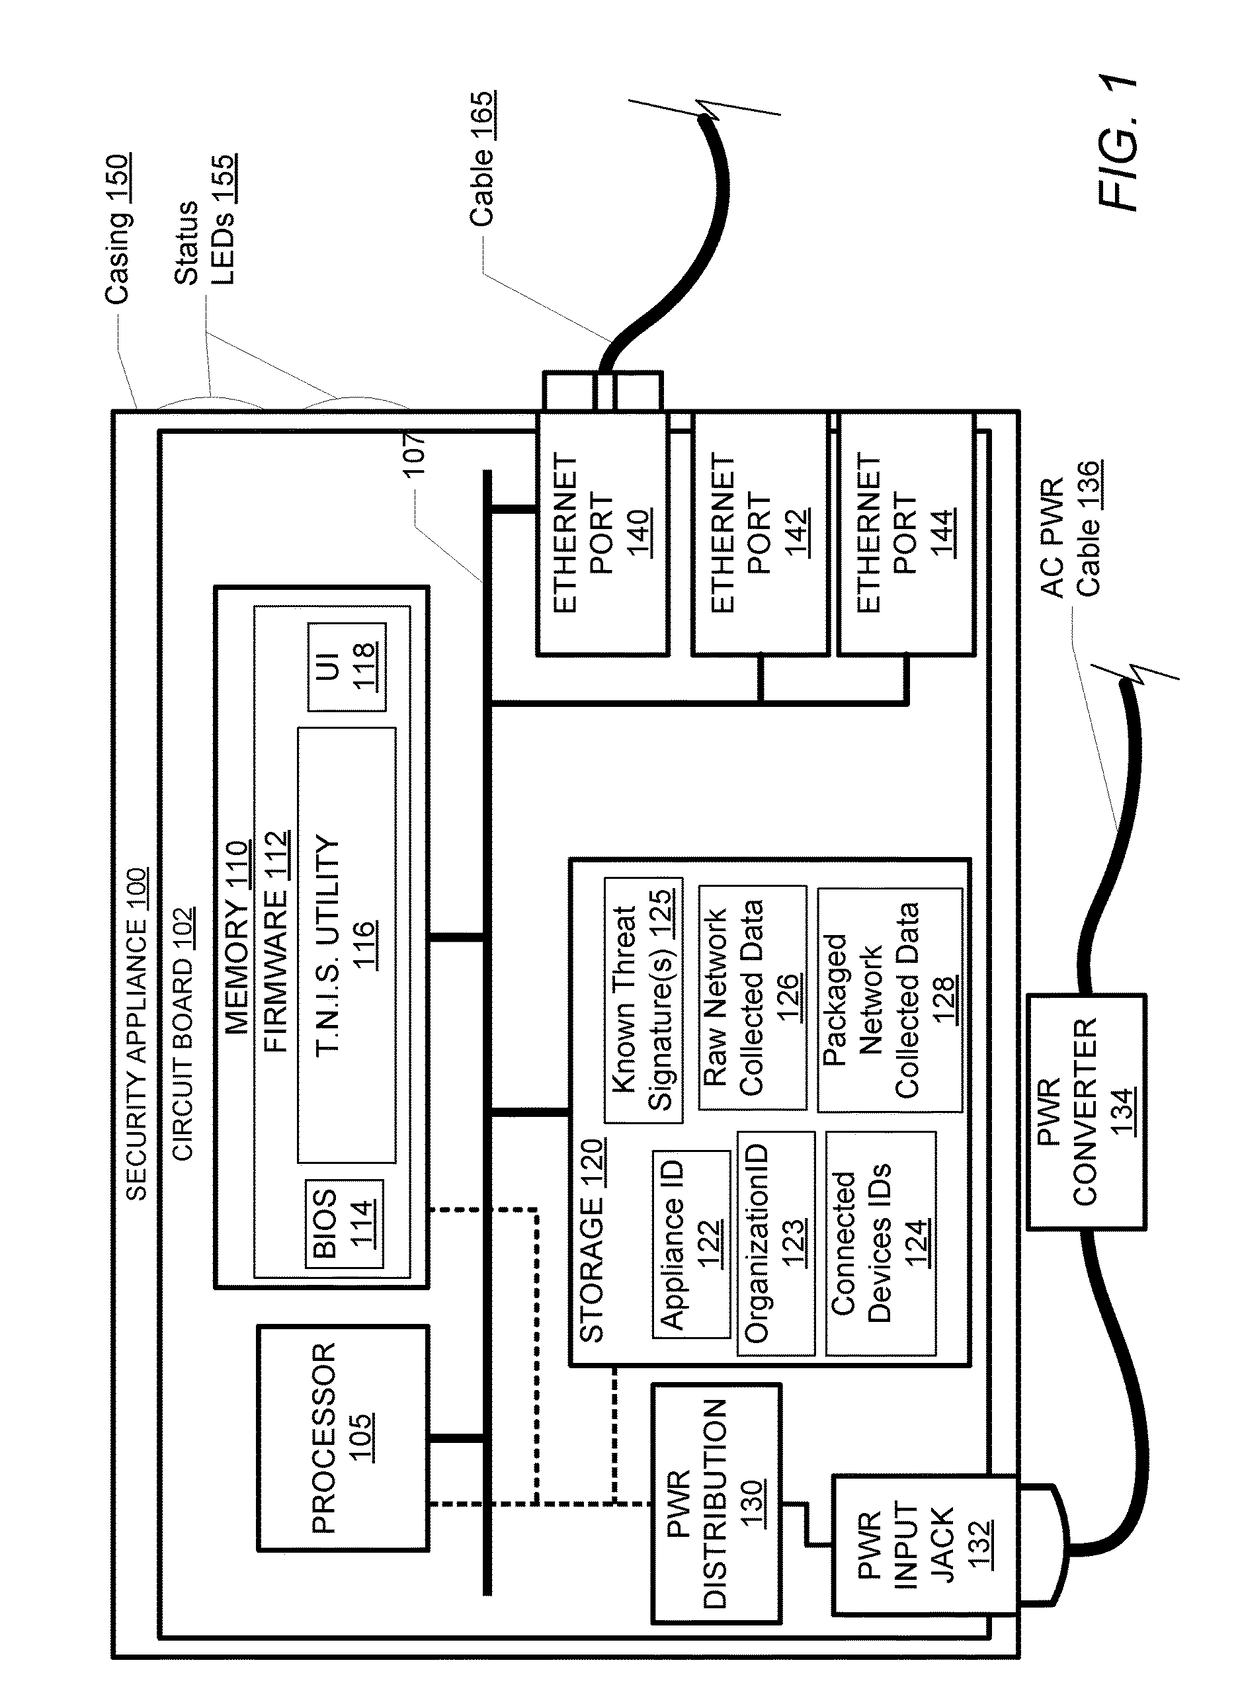 Method and device for robust detection, analytics, and filtering of data/information exchange with connected user devices in a gateway-connected user-space